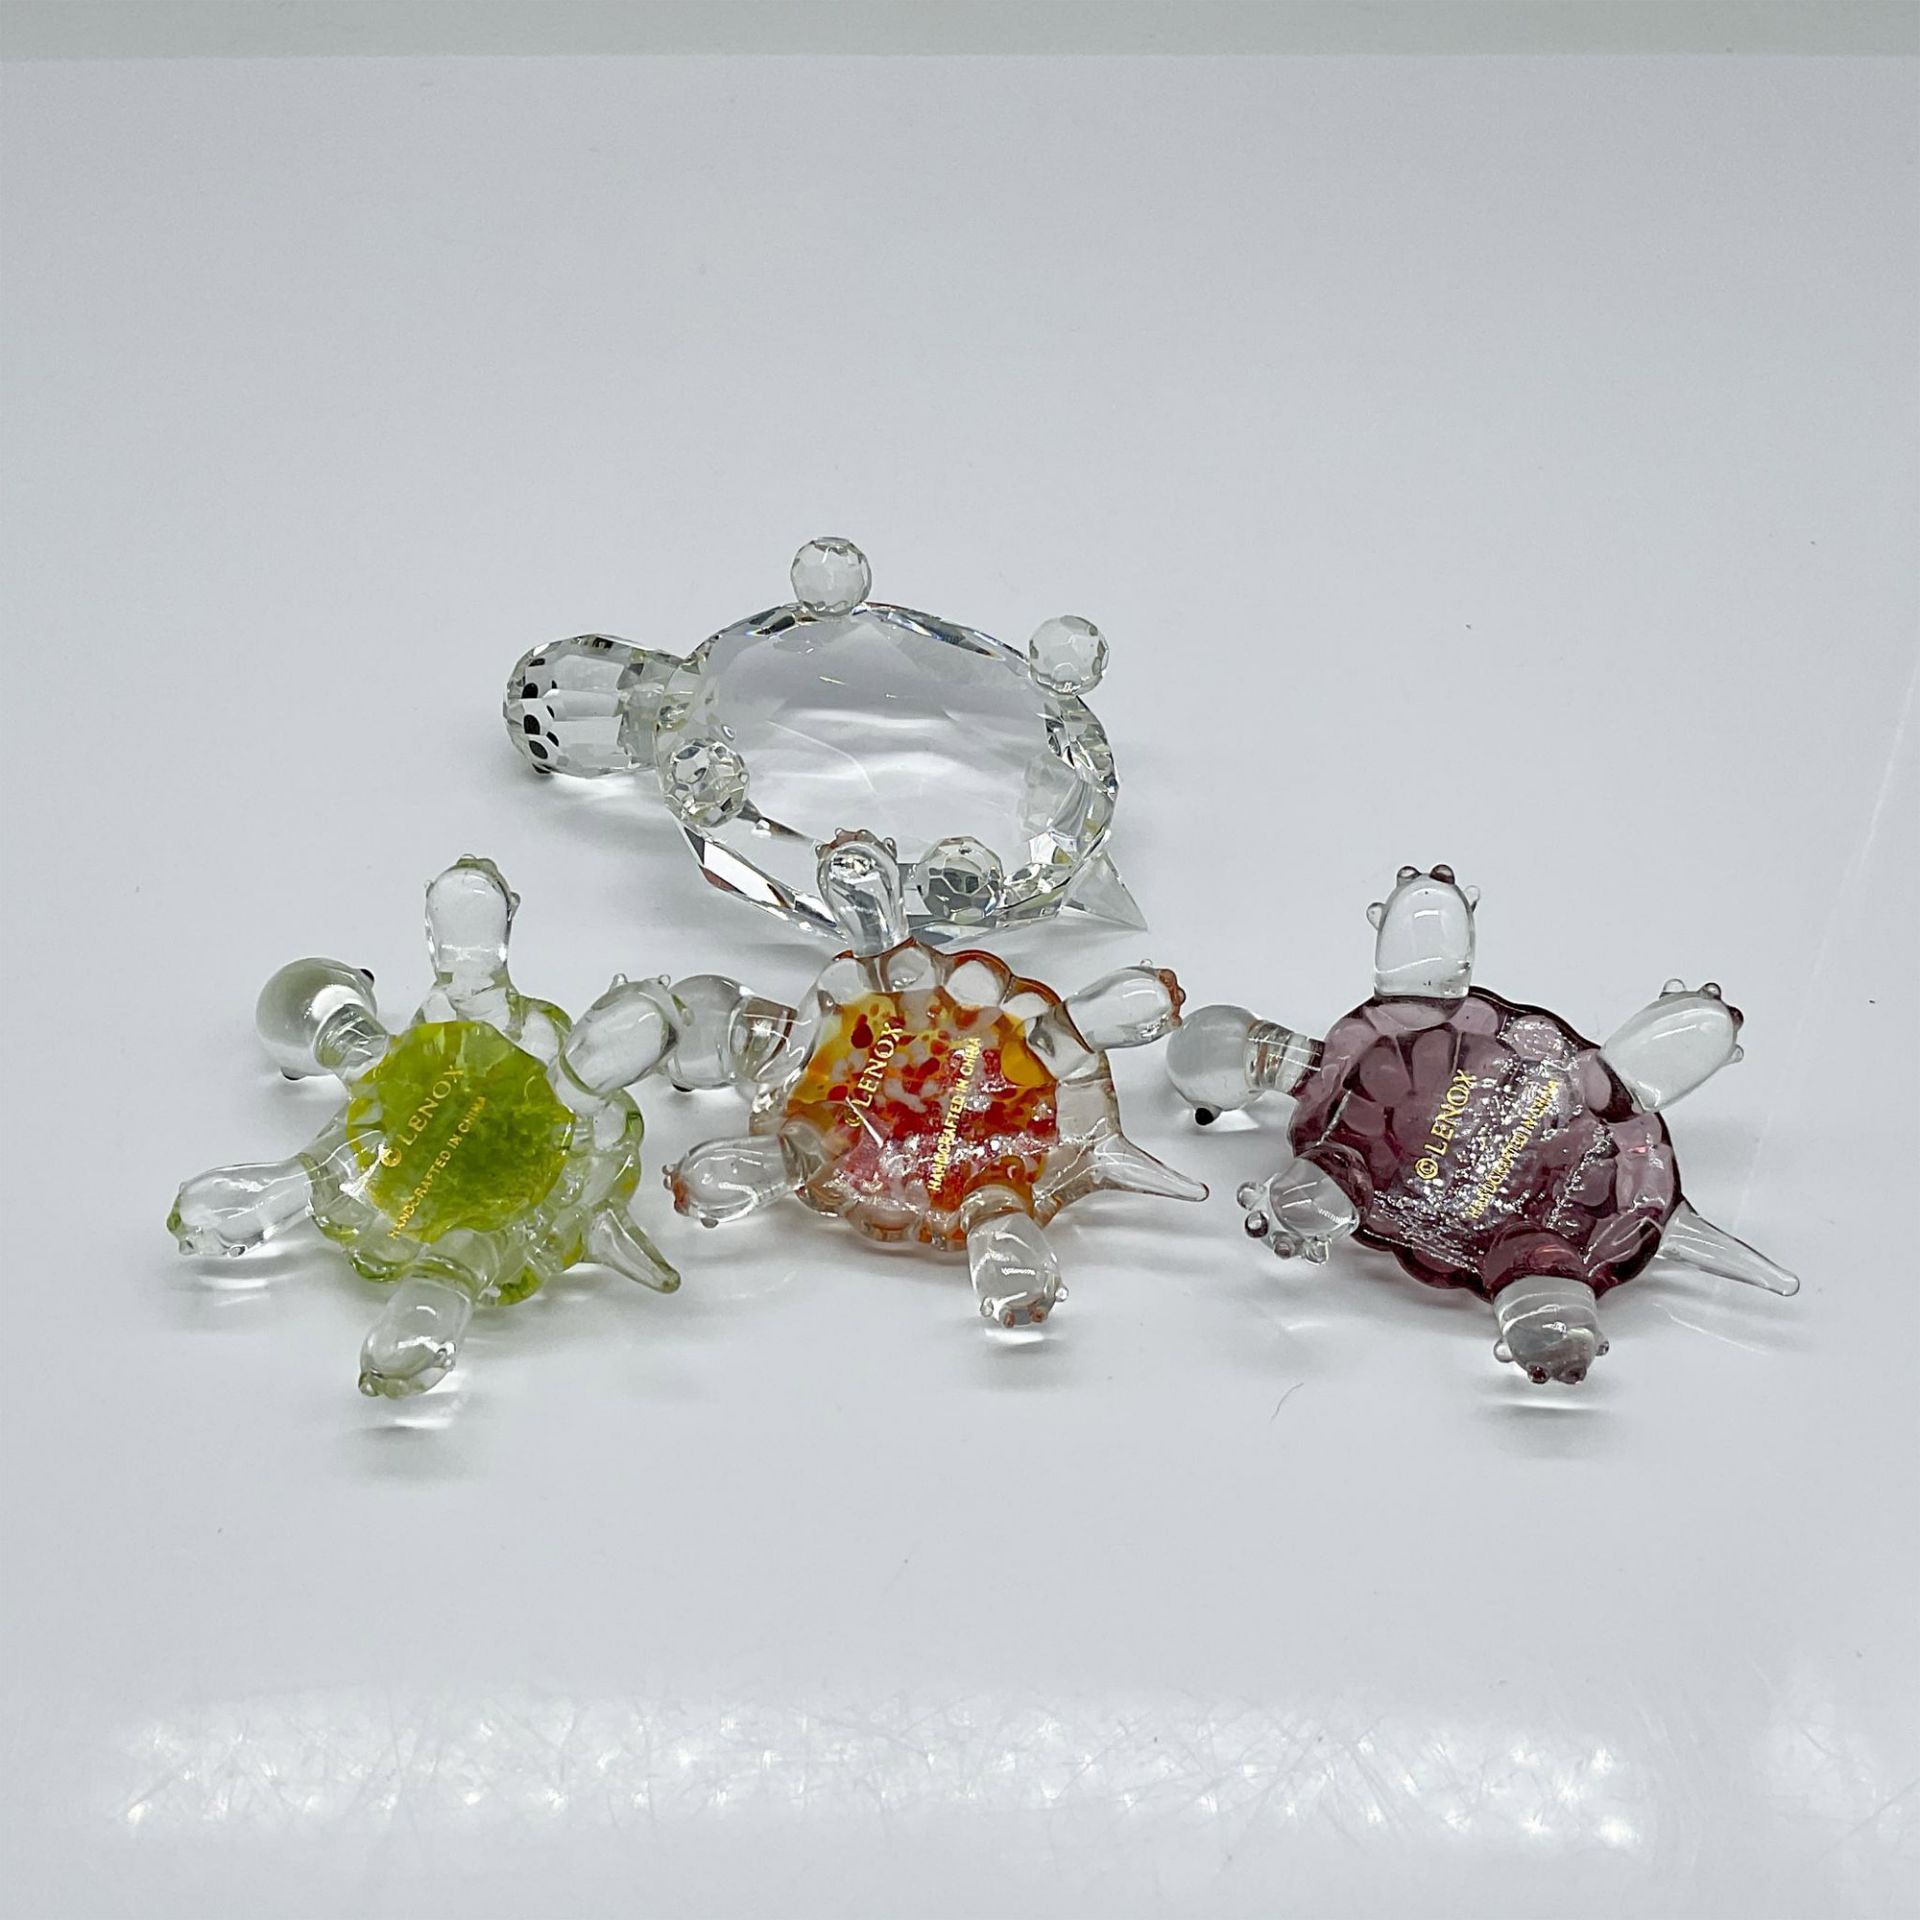 4pc Glass Turtle Grouping, Lenox and Crystal - Image 3 of 4